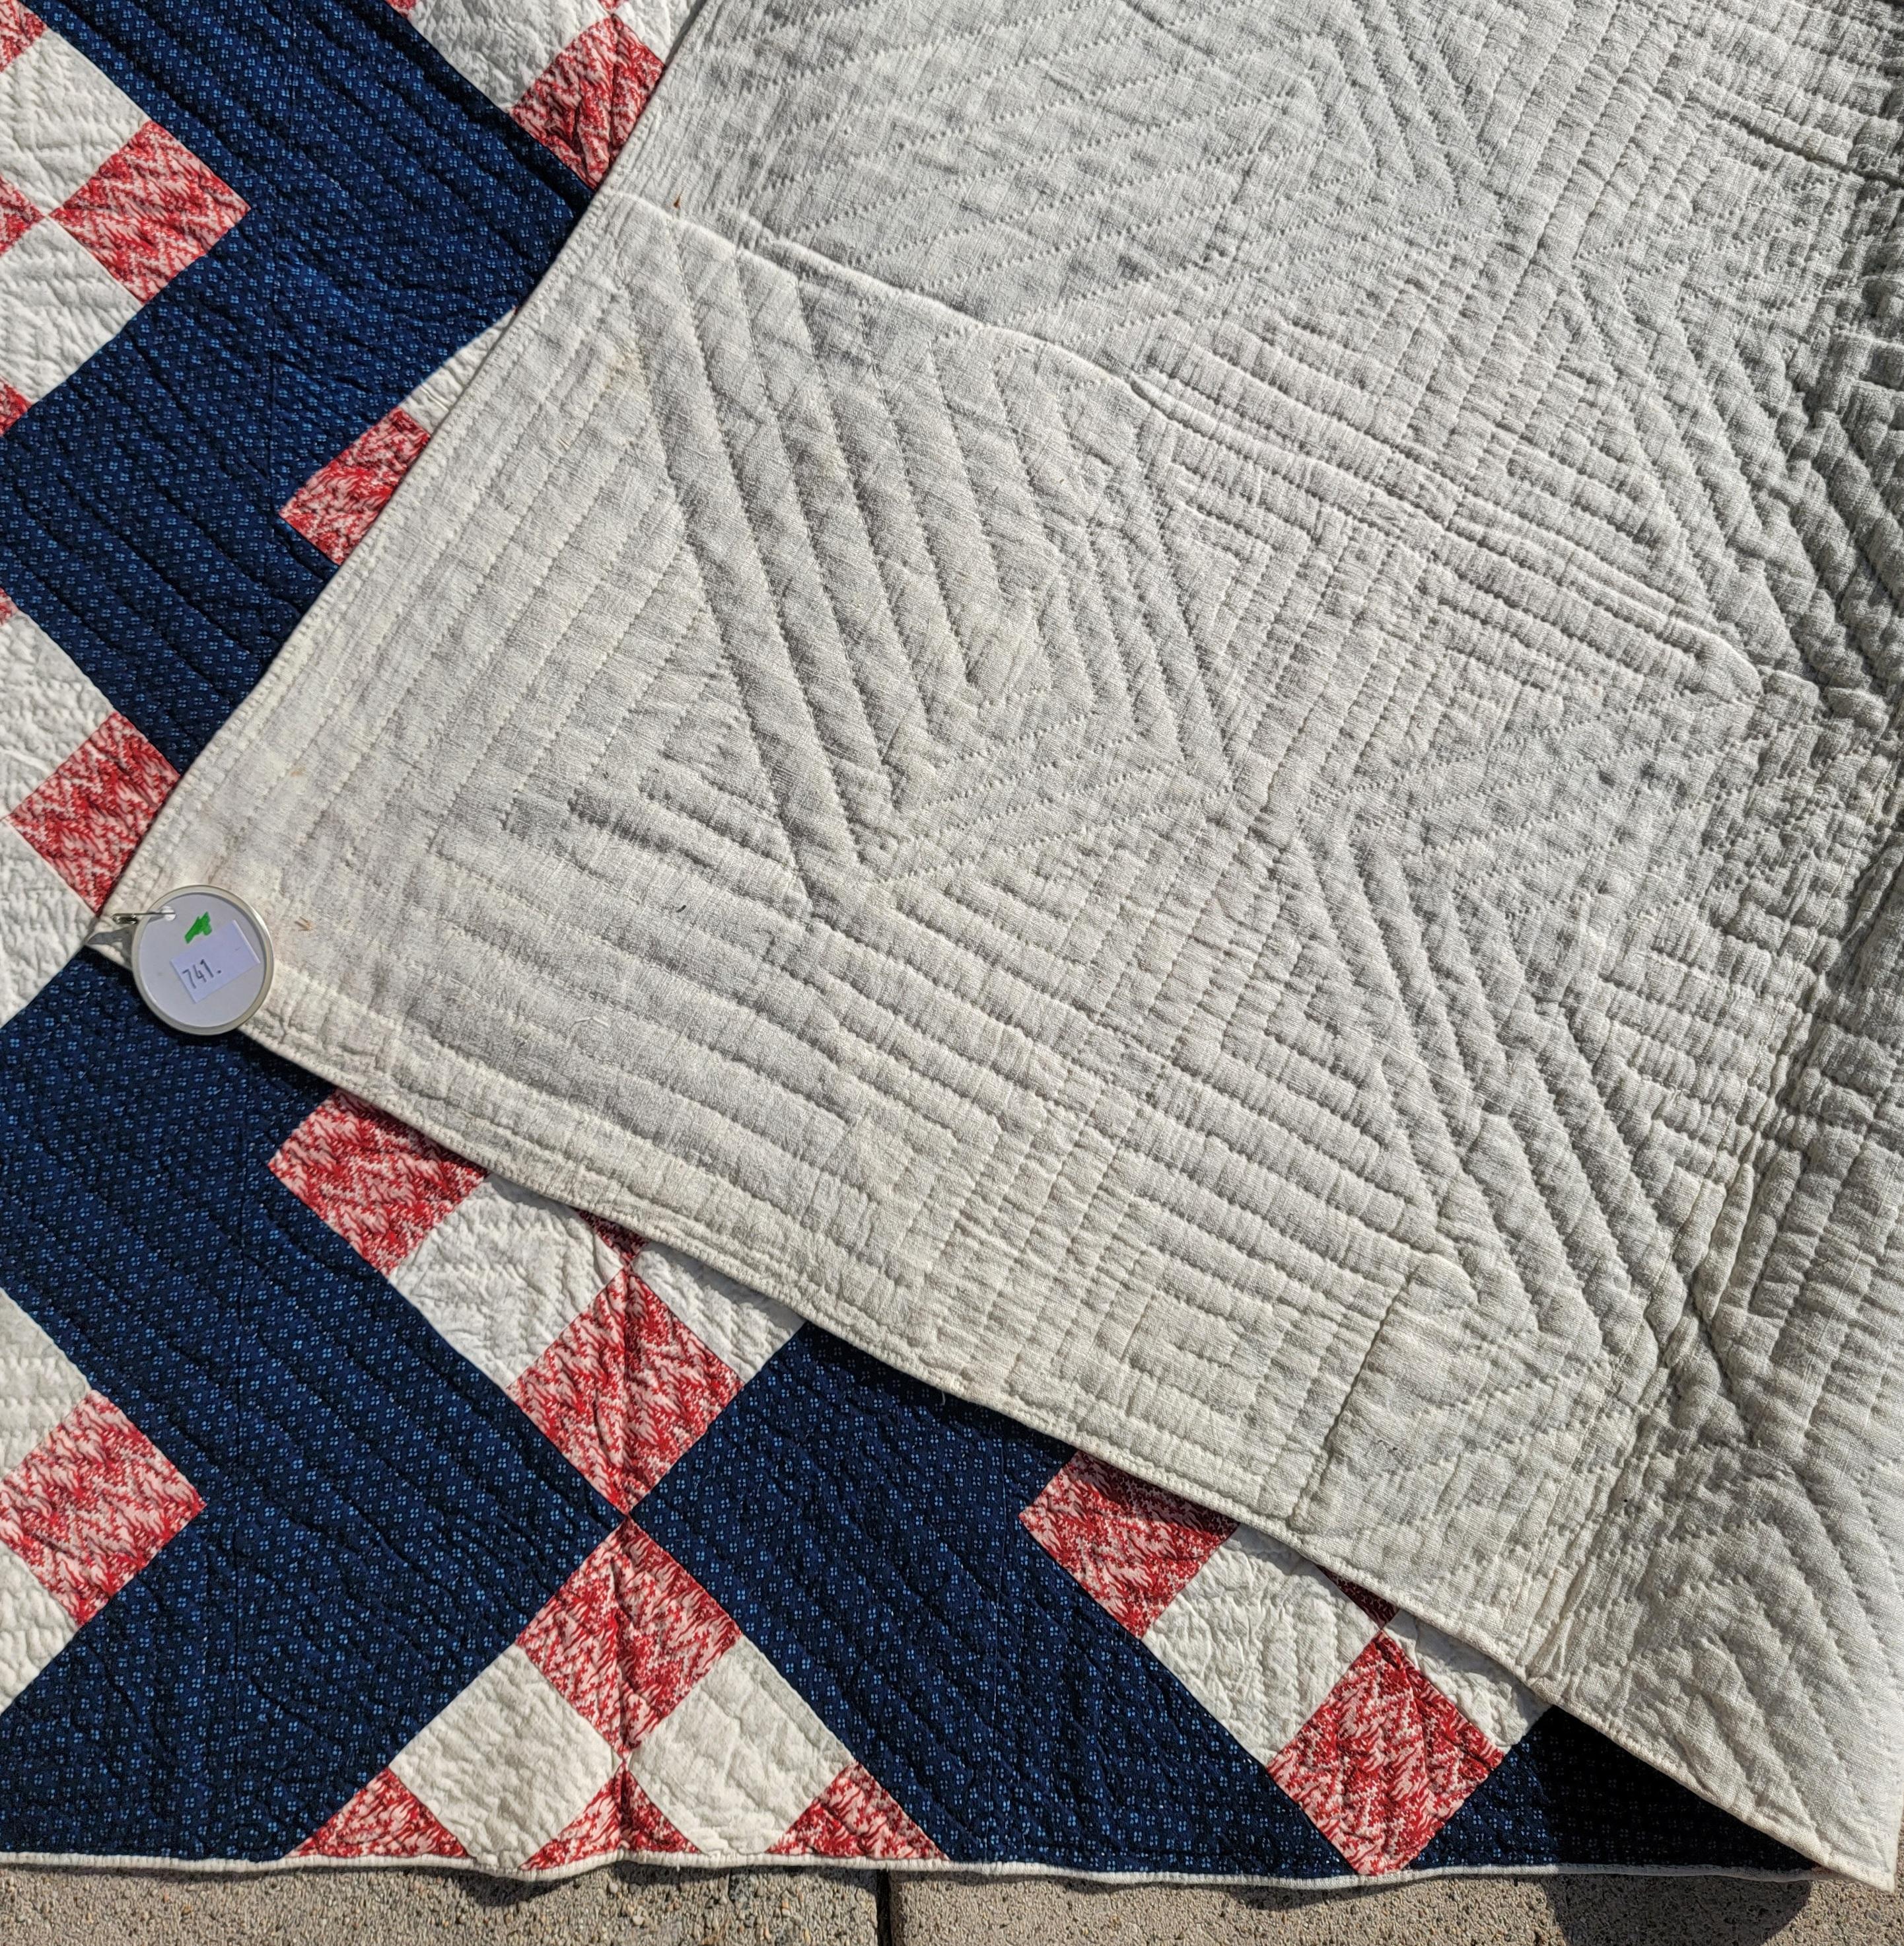 19thc nine patch chain with a streak of lightning indigo blue calico back round in fine condition.This New England quilt is in pristine condition.